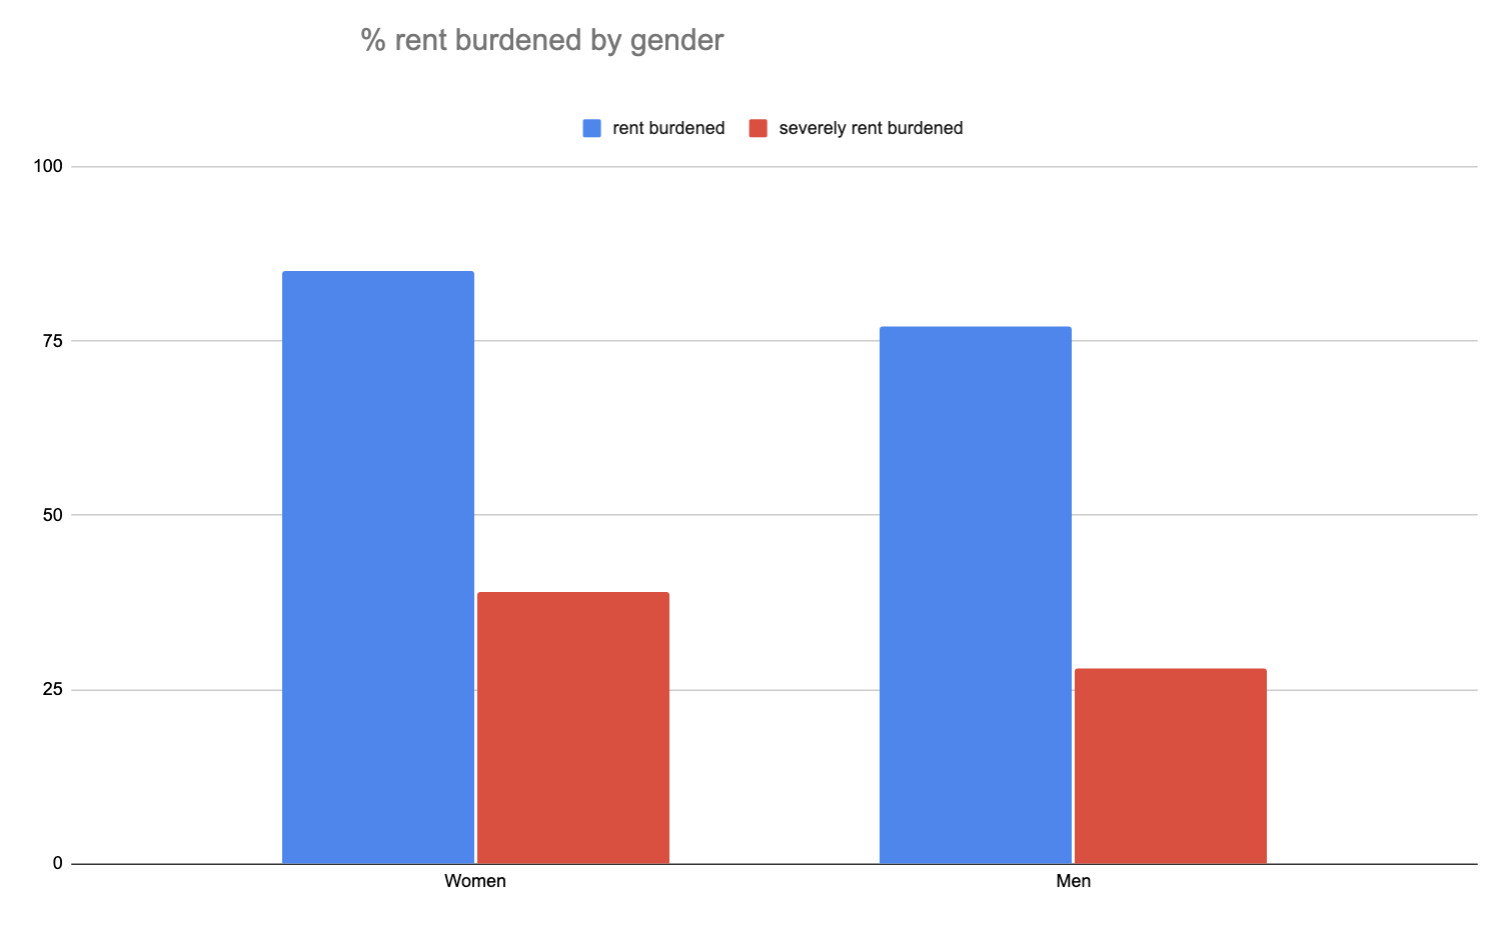 Chart showing percent of renters burdened by gender